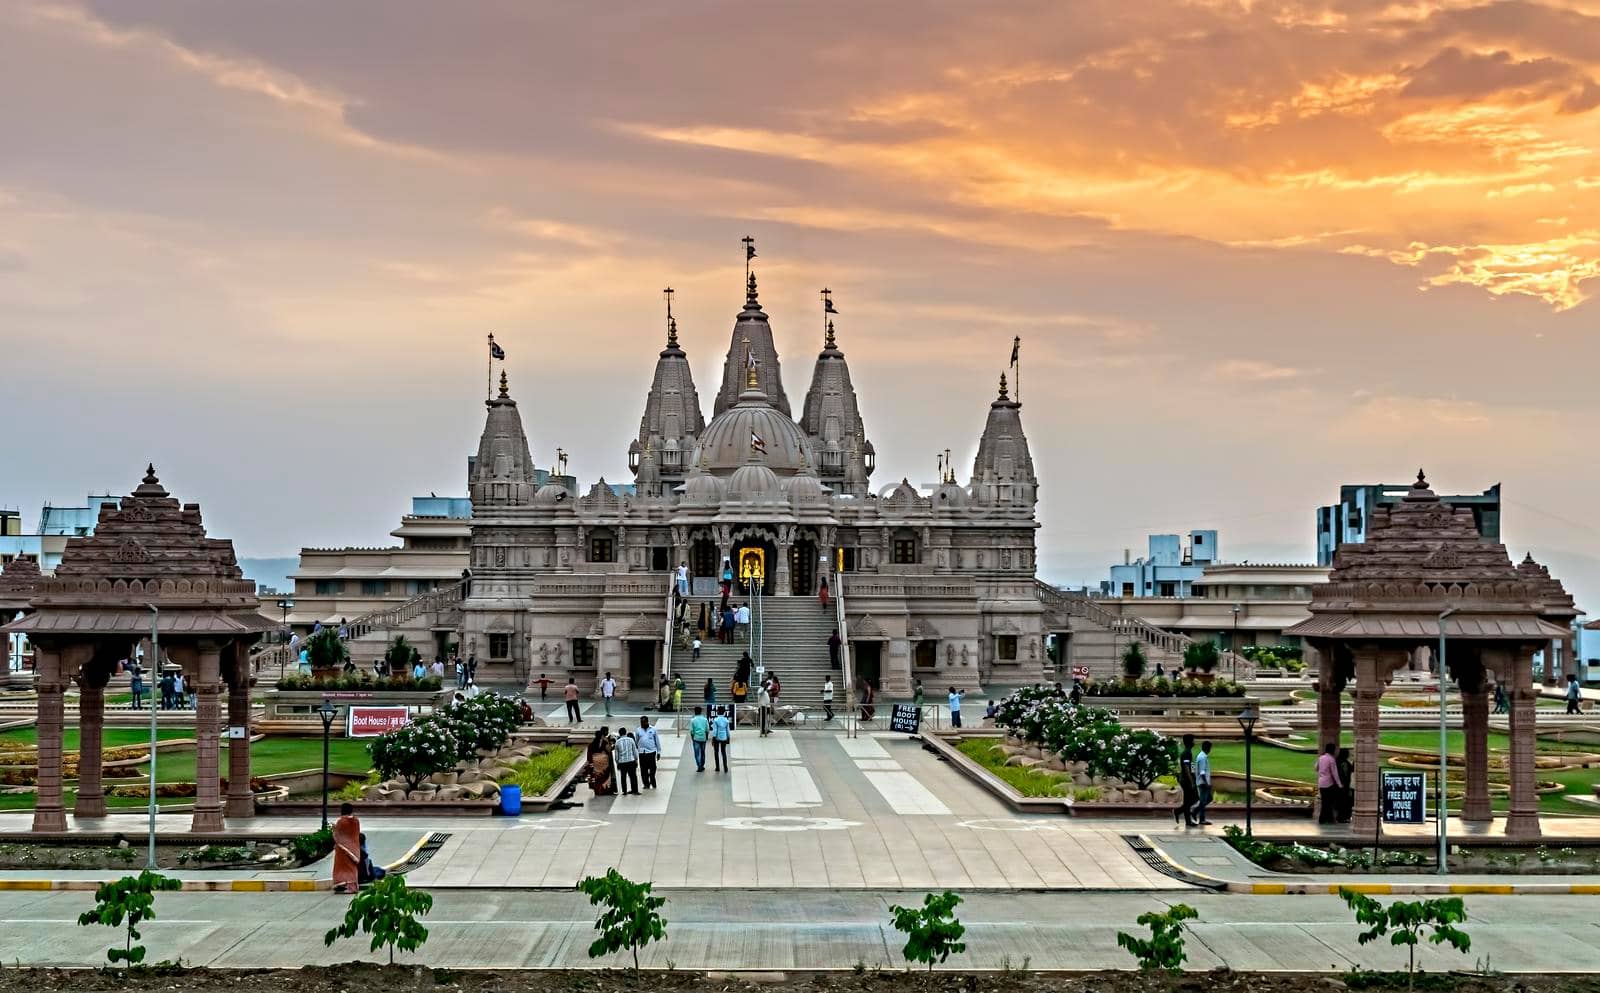 Beautiful evening sunset light on the background of Shree Swaminarayan temple by lalam